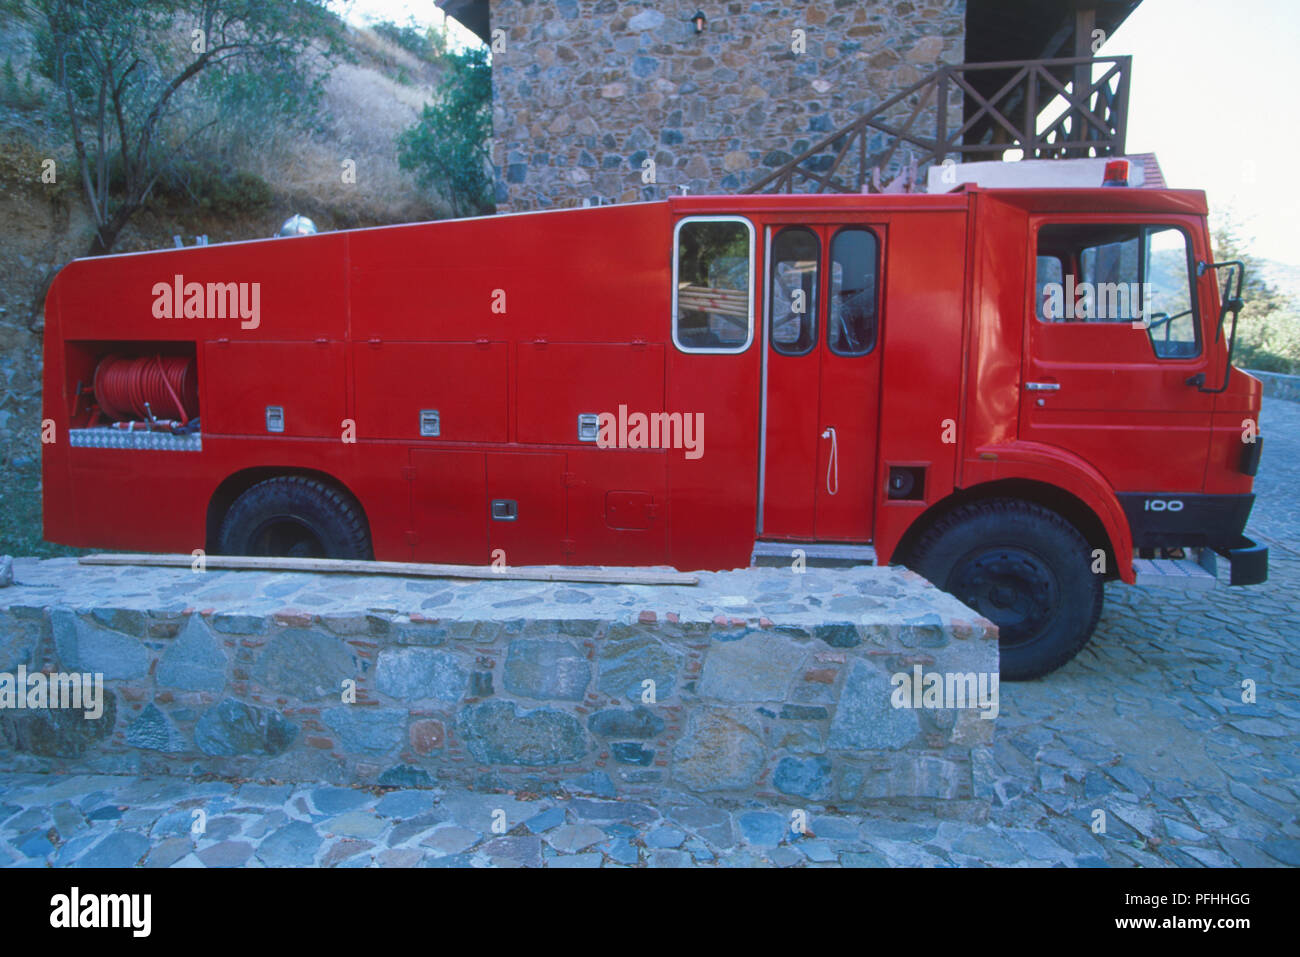 Cyprus, red fire engine parked by side of building Stock Photo